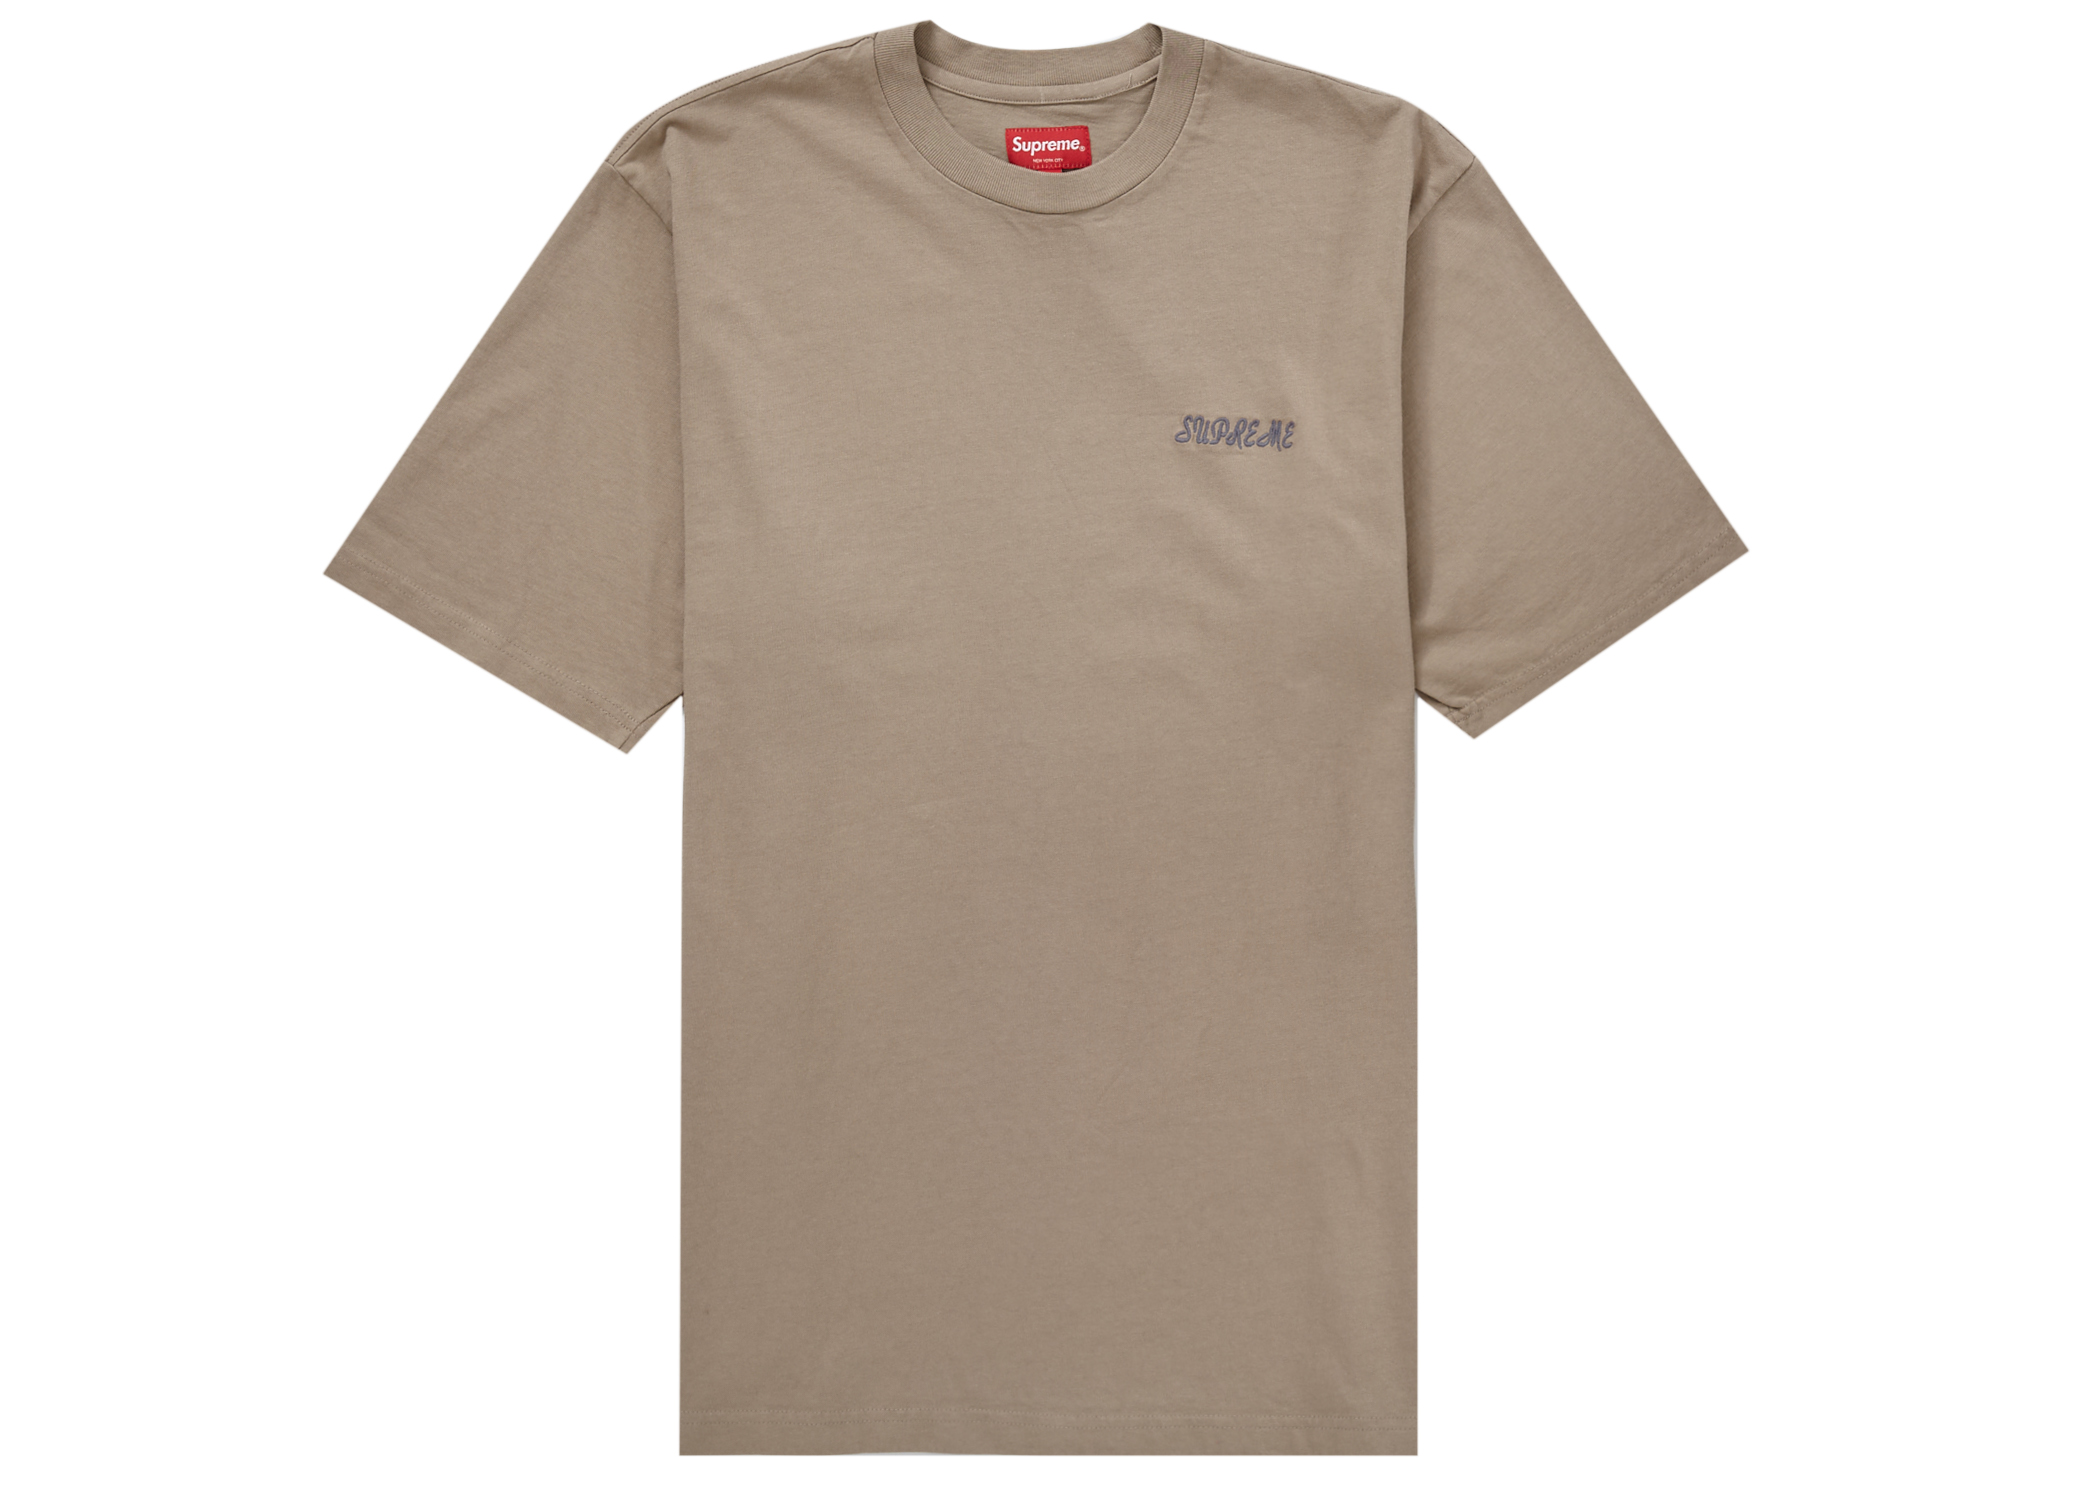 Supreme Washed Script S/S Top Tan